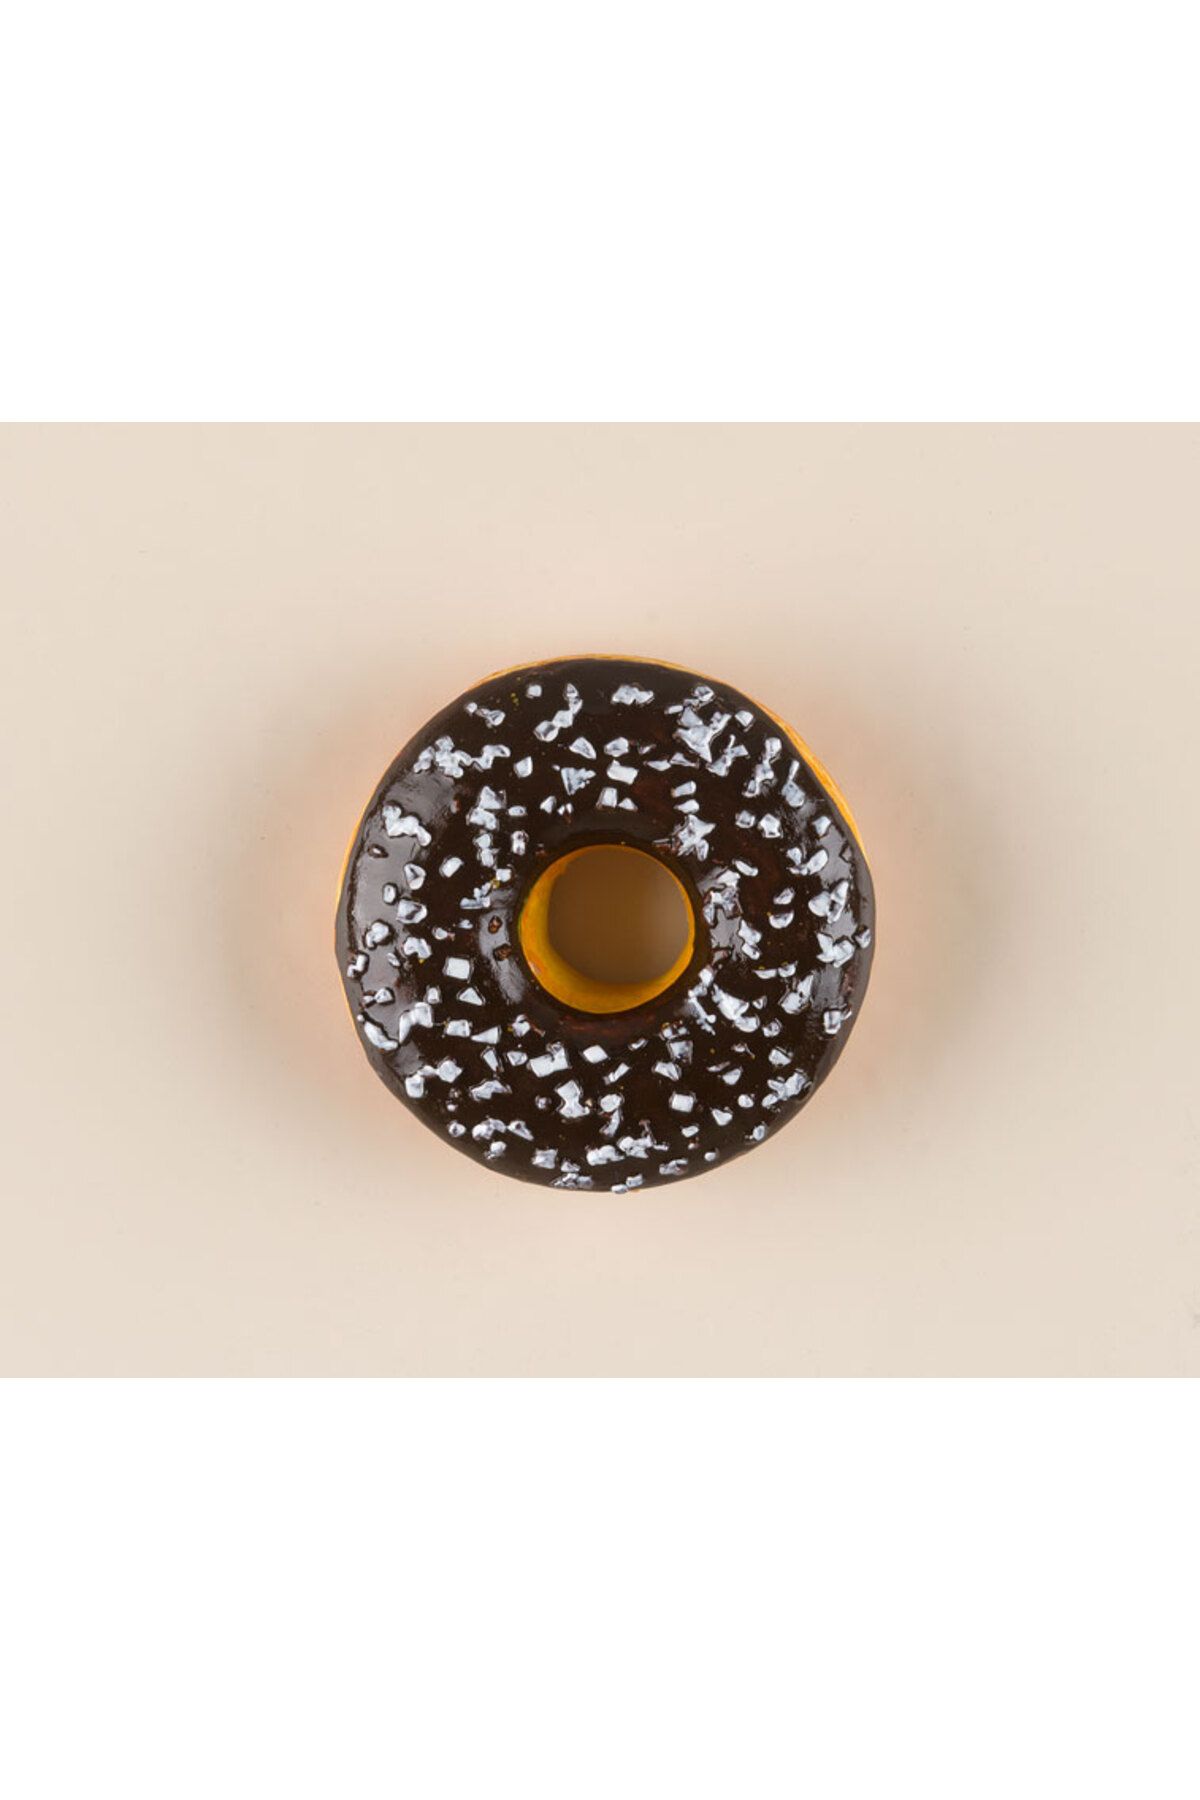 Madame Coco Donut Magnet 1